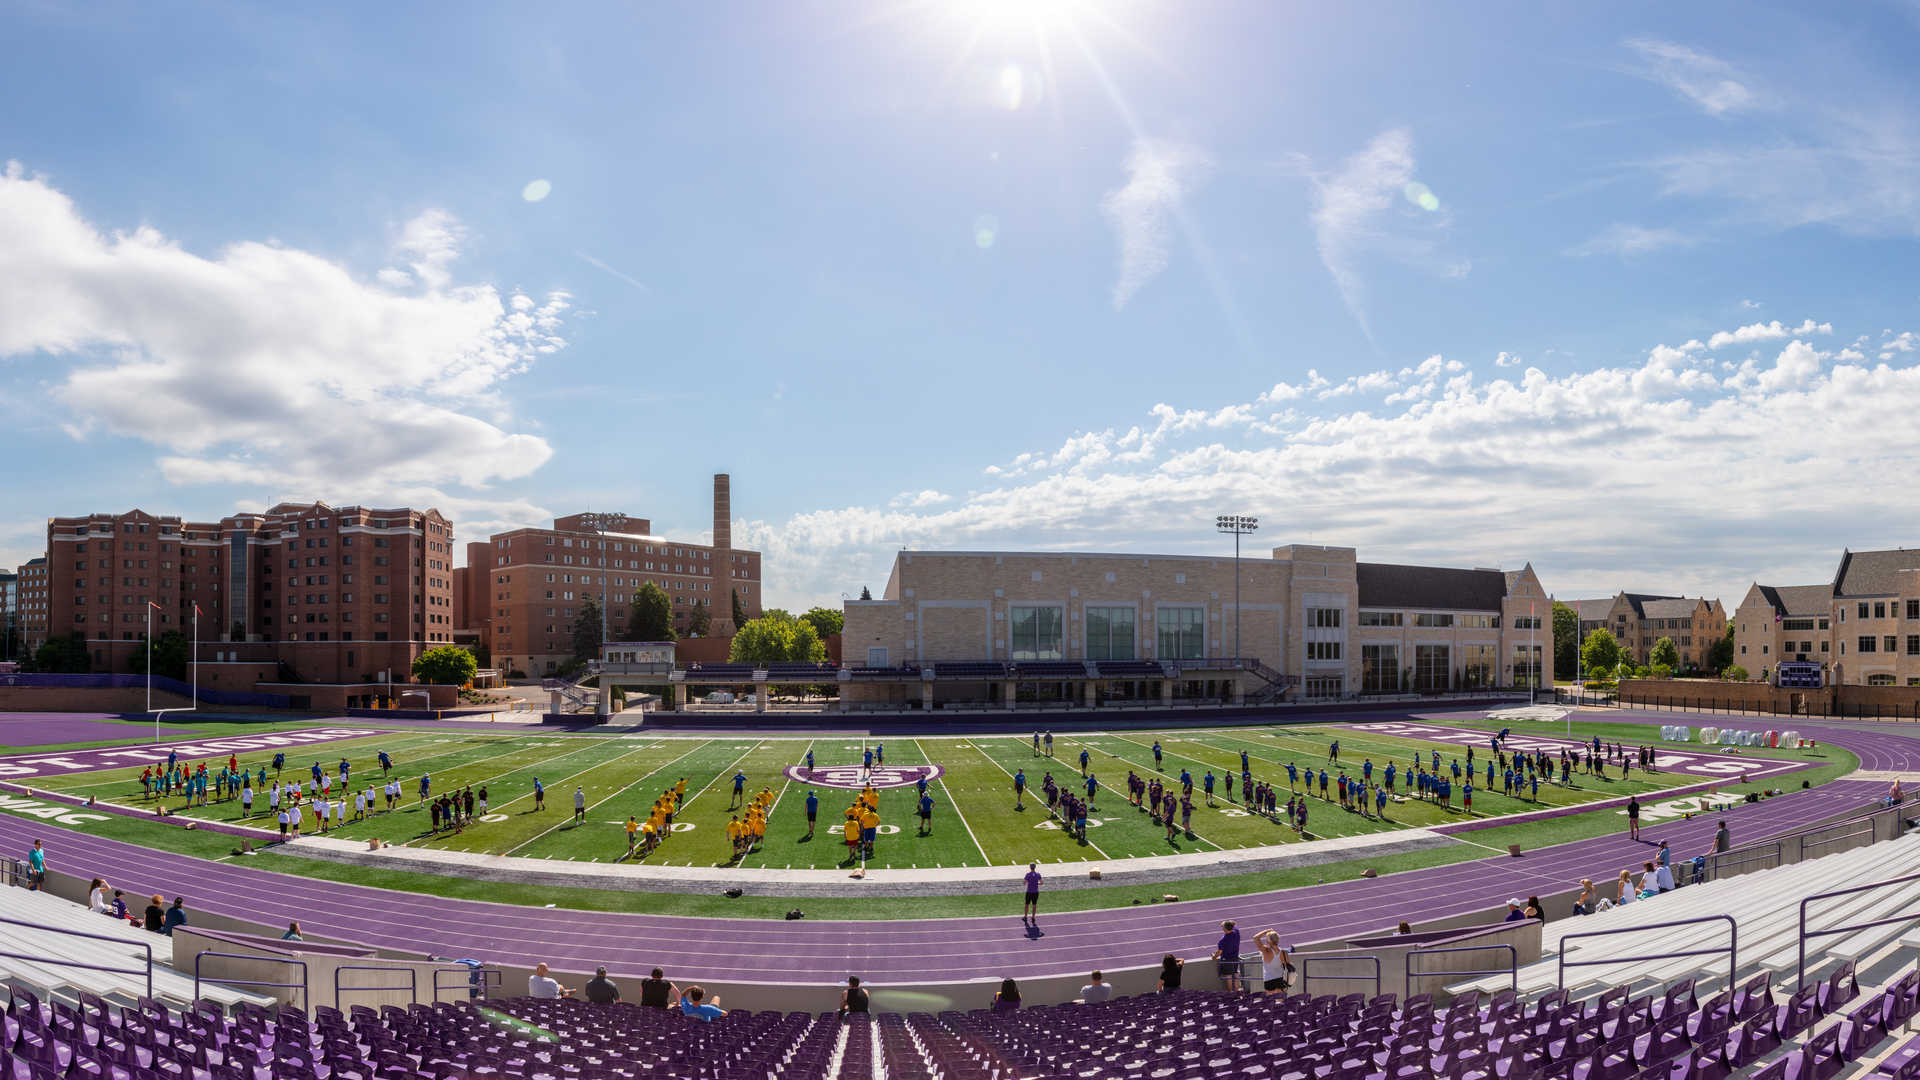 camp attendees participate in drills at the O'Shaughnessy Stadium